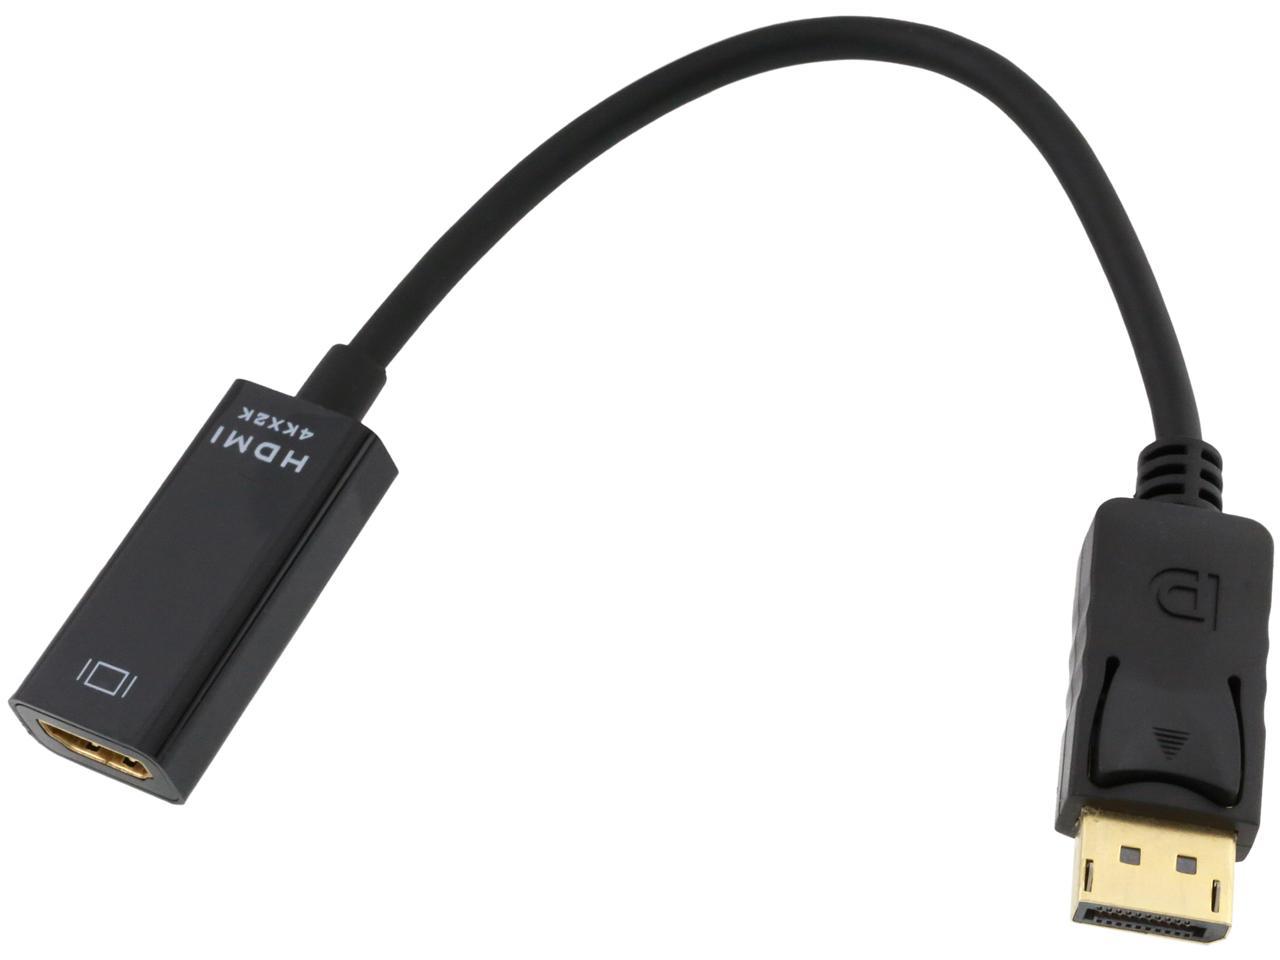 Nippon Labs 20AD DPHDMI MF Active DisplayPort To HDMI Adapter Connect